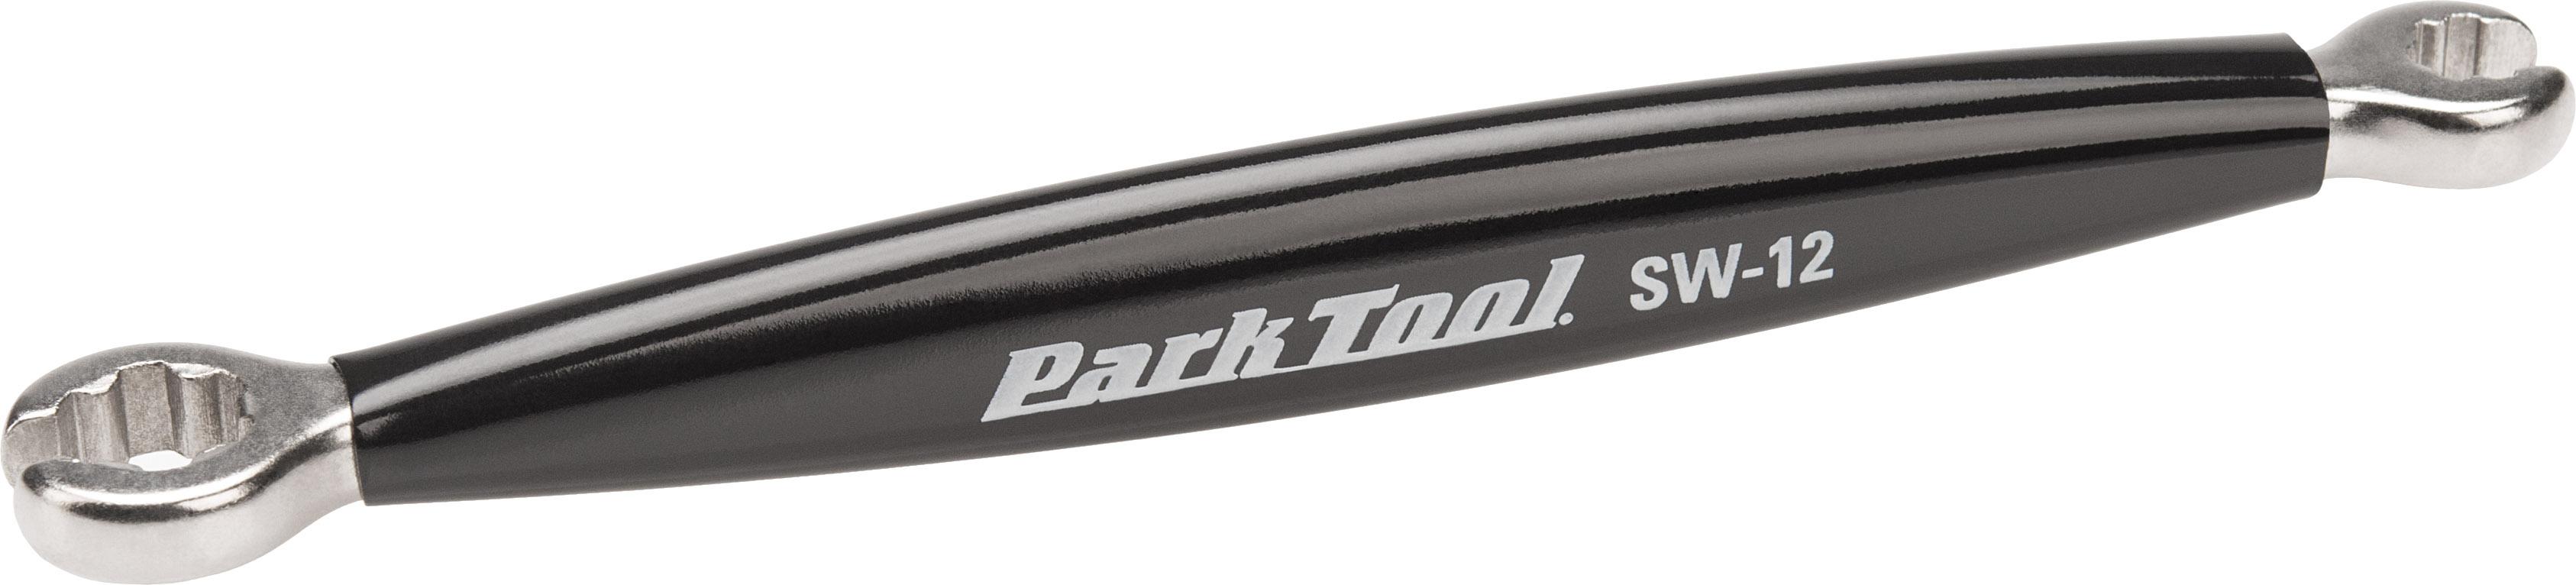 Park Tool Double-ended Spoke Wrench Sw-12 - Black